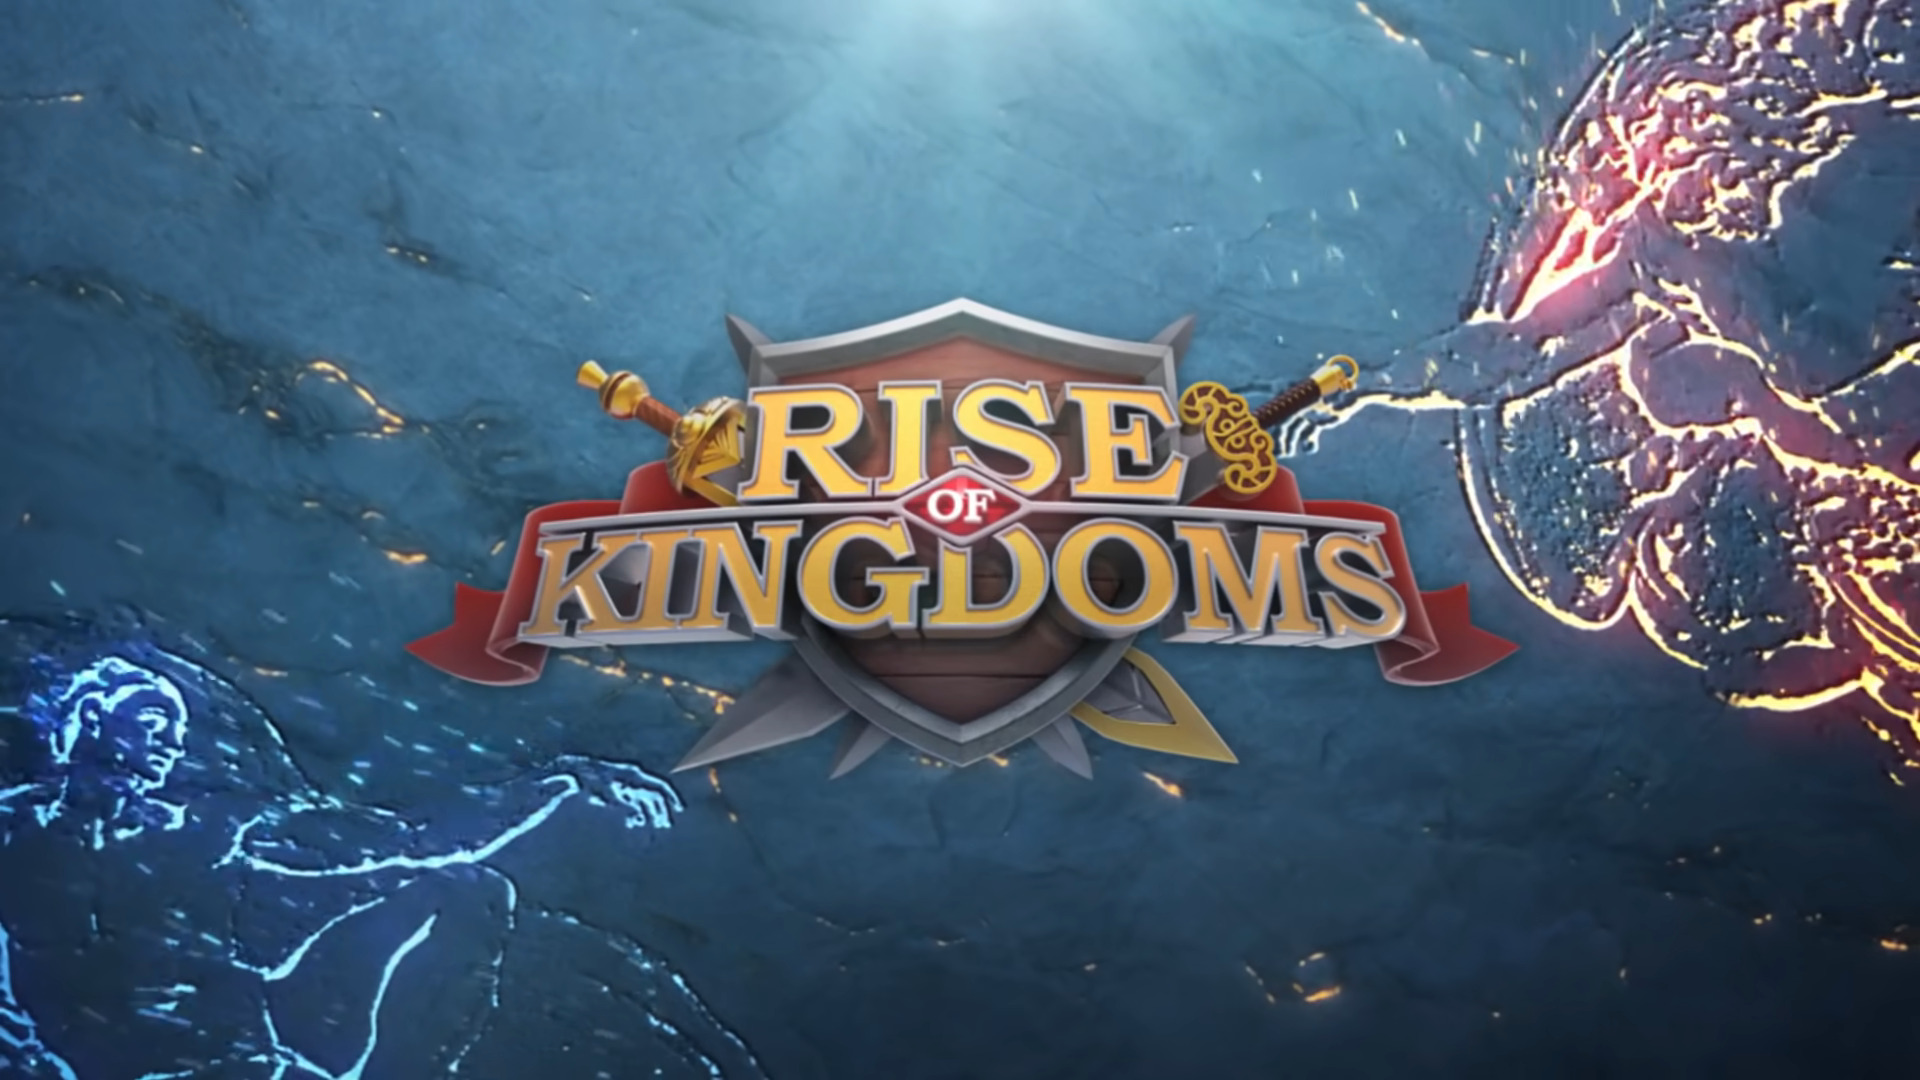 Disturbing Rise Of Kingdoms Advertisement On YouTube Makes Light Of Rape And Violence